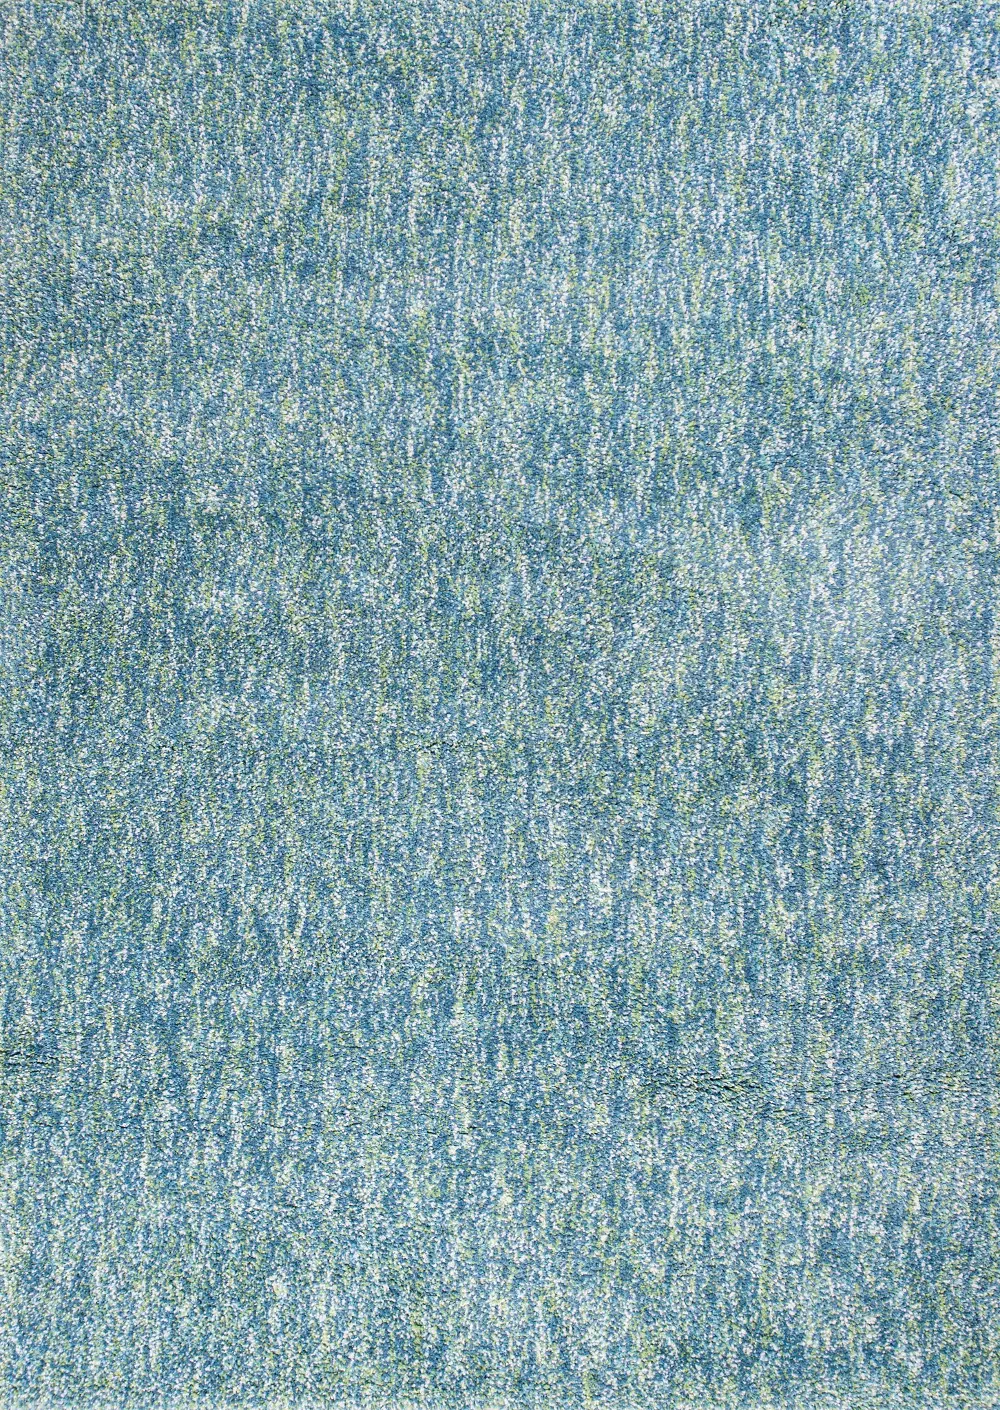 7 x 9 Large Seafoam Blue and Ivory Area Rug - Bliss   -1